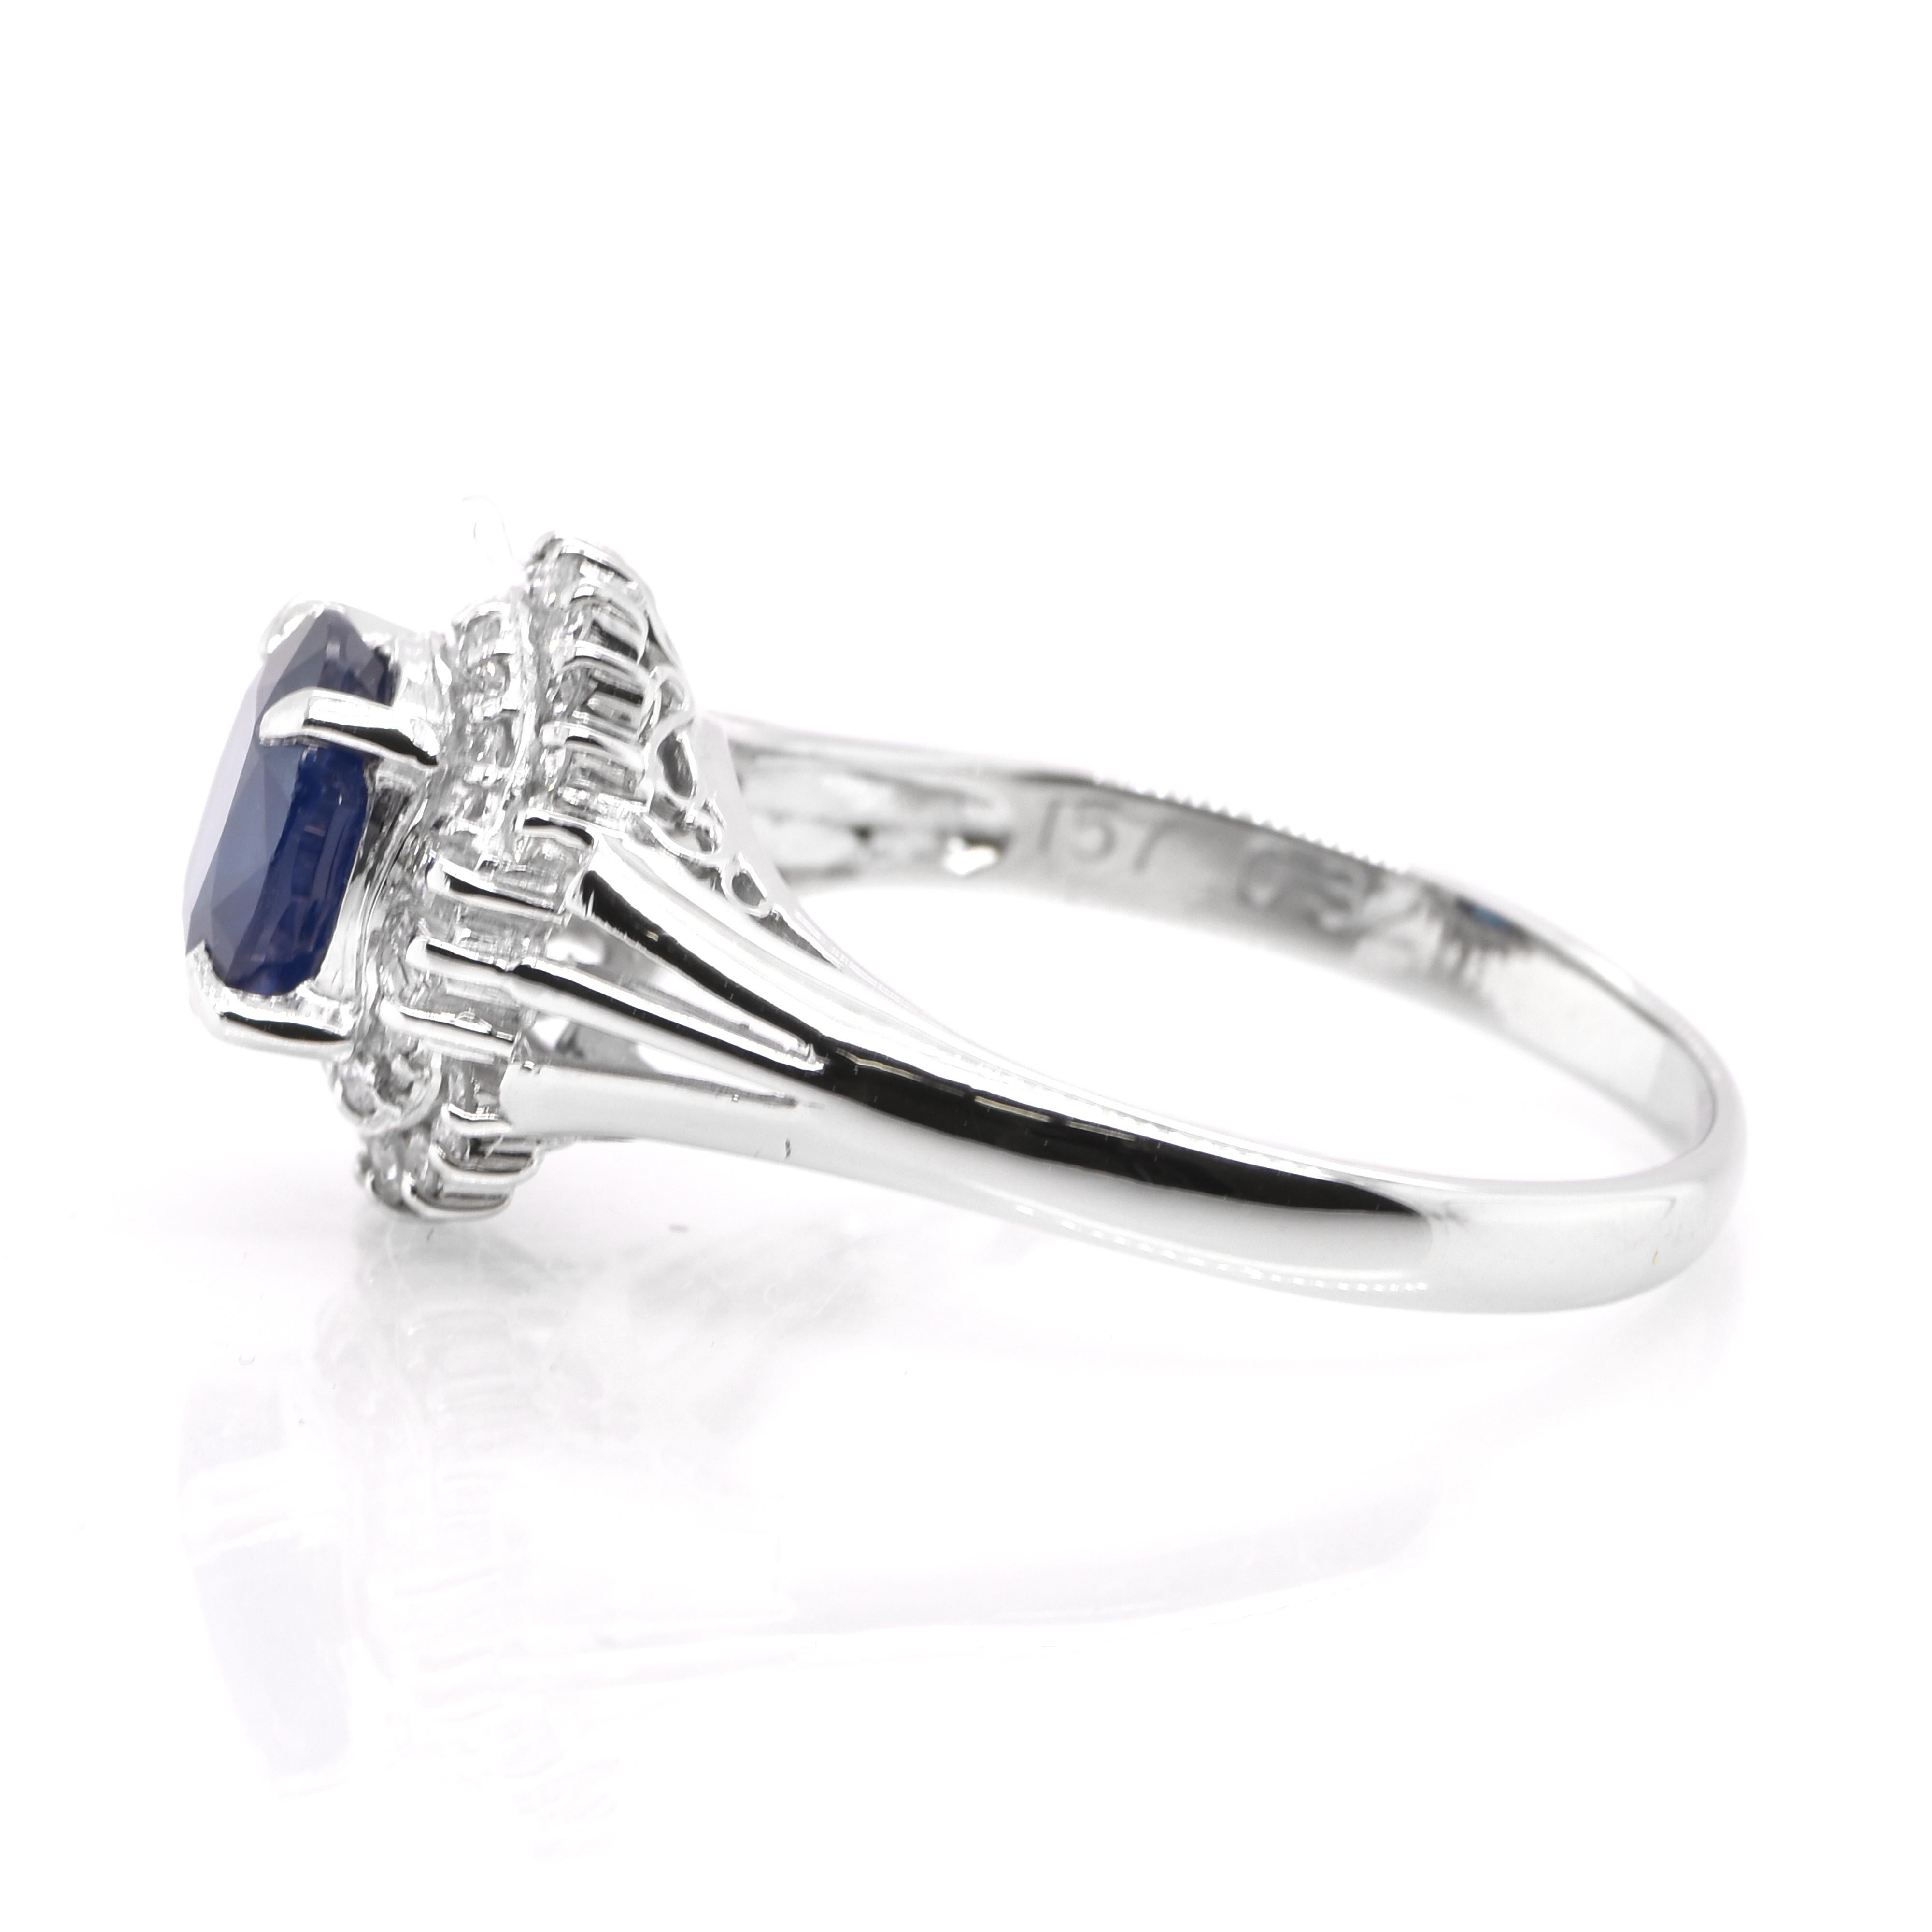 Modern 1.57 Carat Natural Sapphire and Diamond Ballerina Cocktail Ring set in Platinum For Sale